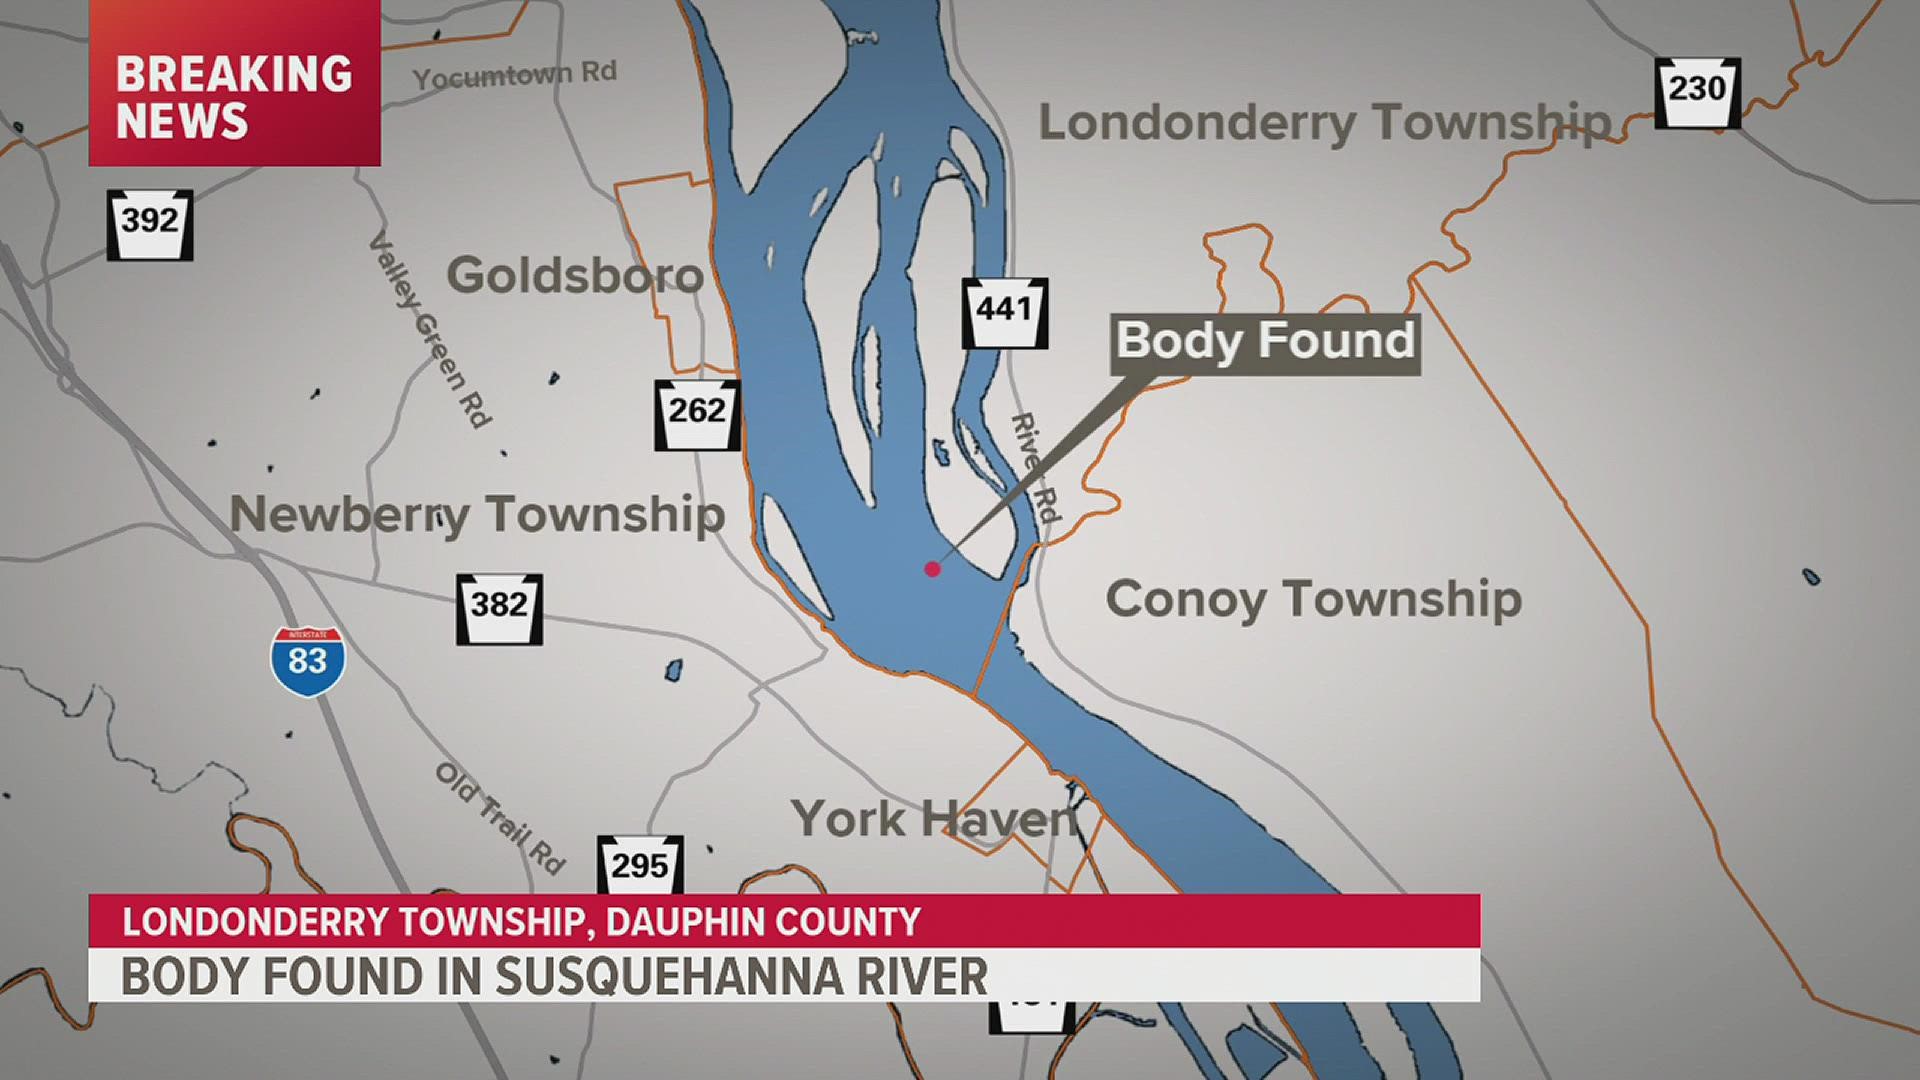 State Police say that a body was located in the Susquehanna River near Three Mile Island.